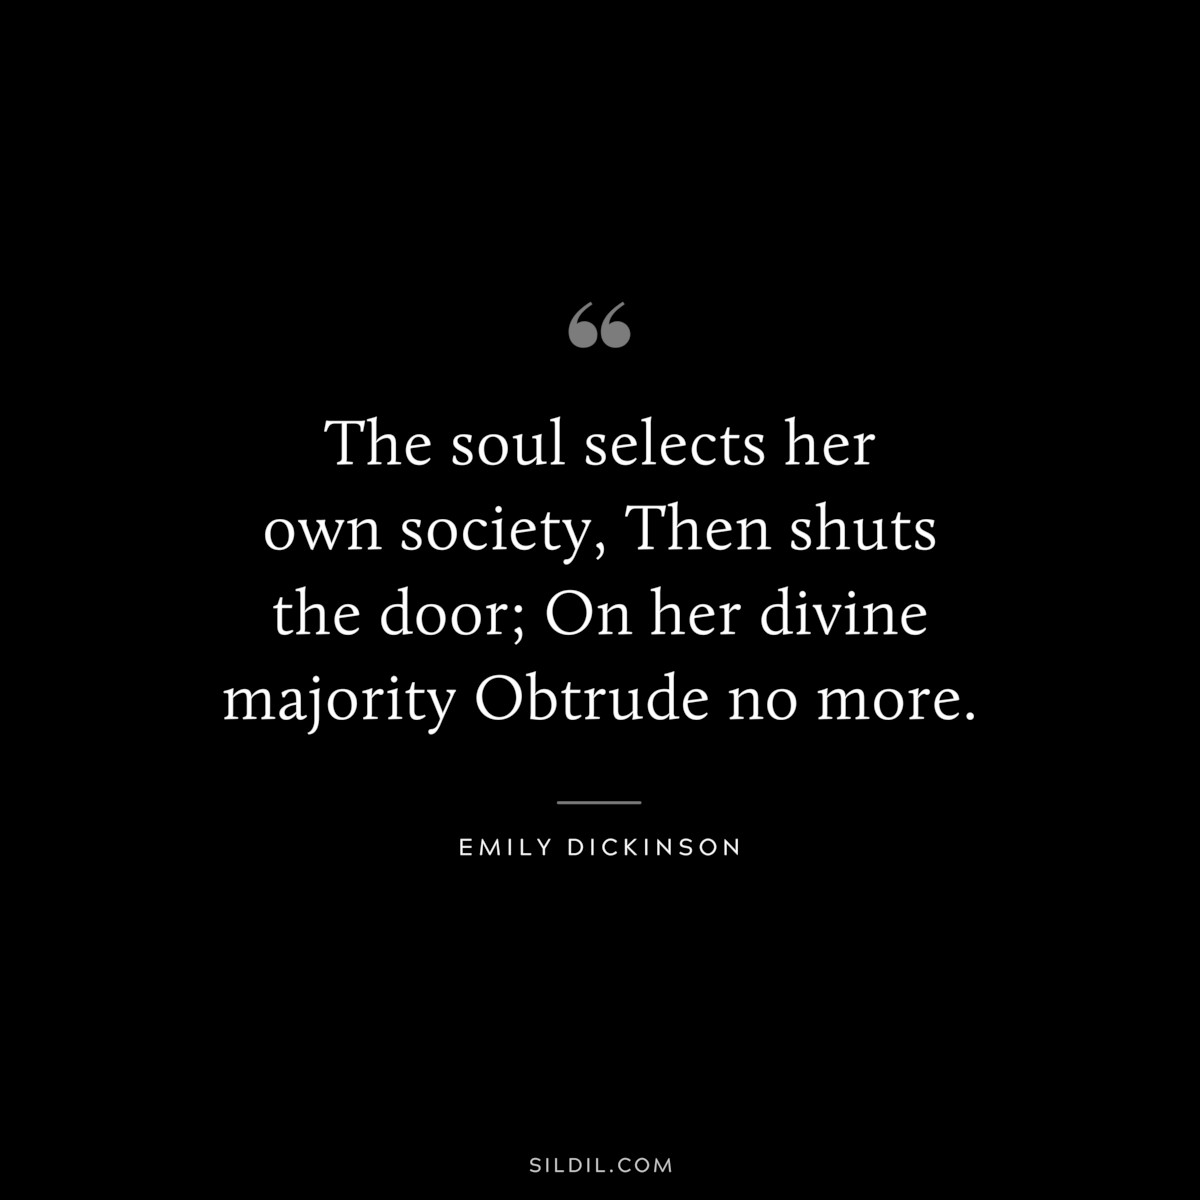 The soul selects her own society, Then shuts the door; On her divine majority Obtrude no more.